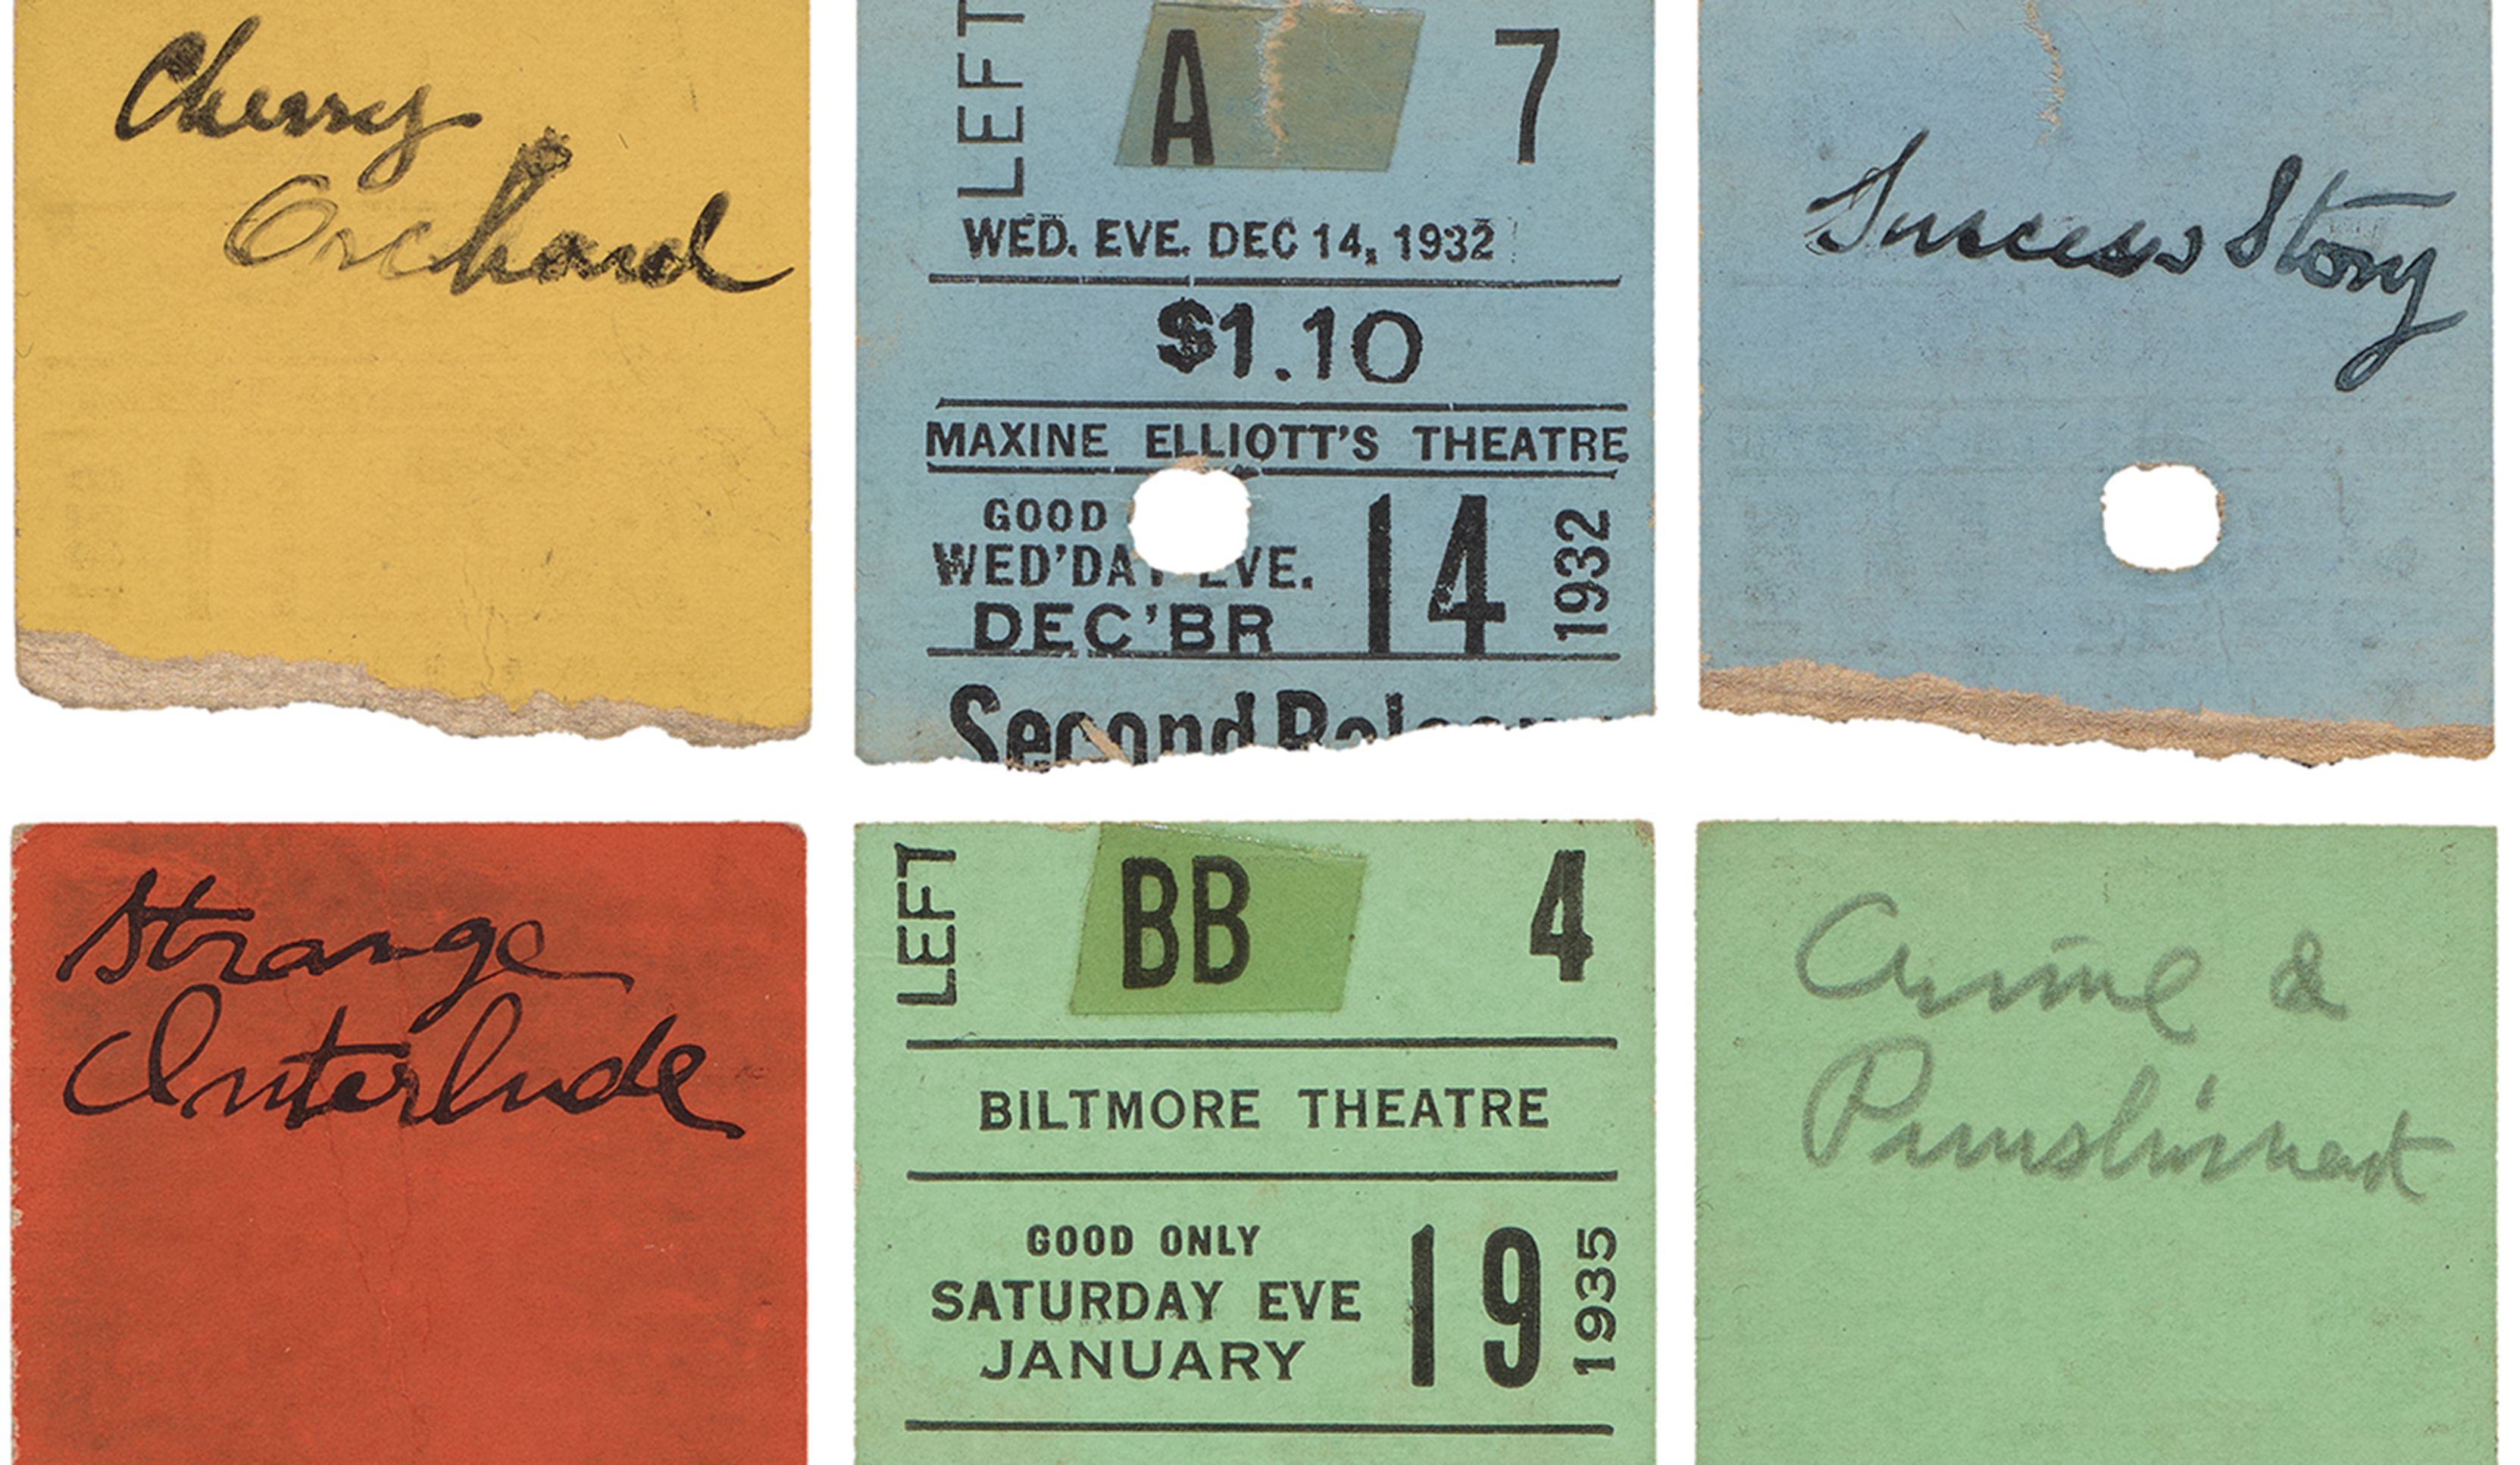 Colorful ticket stubs